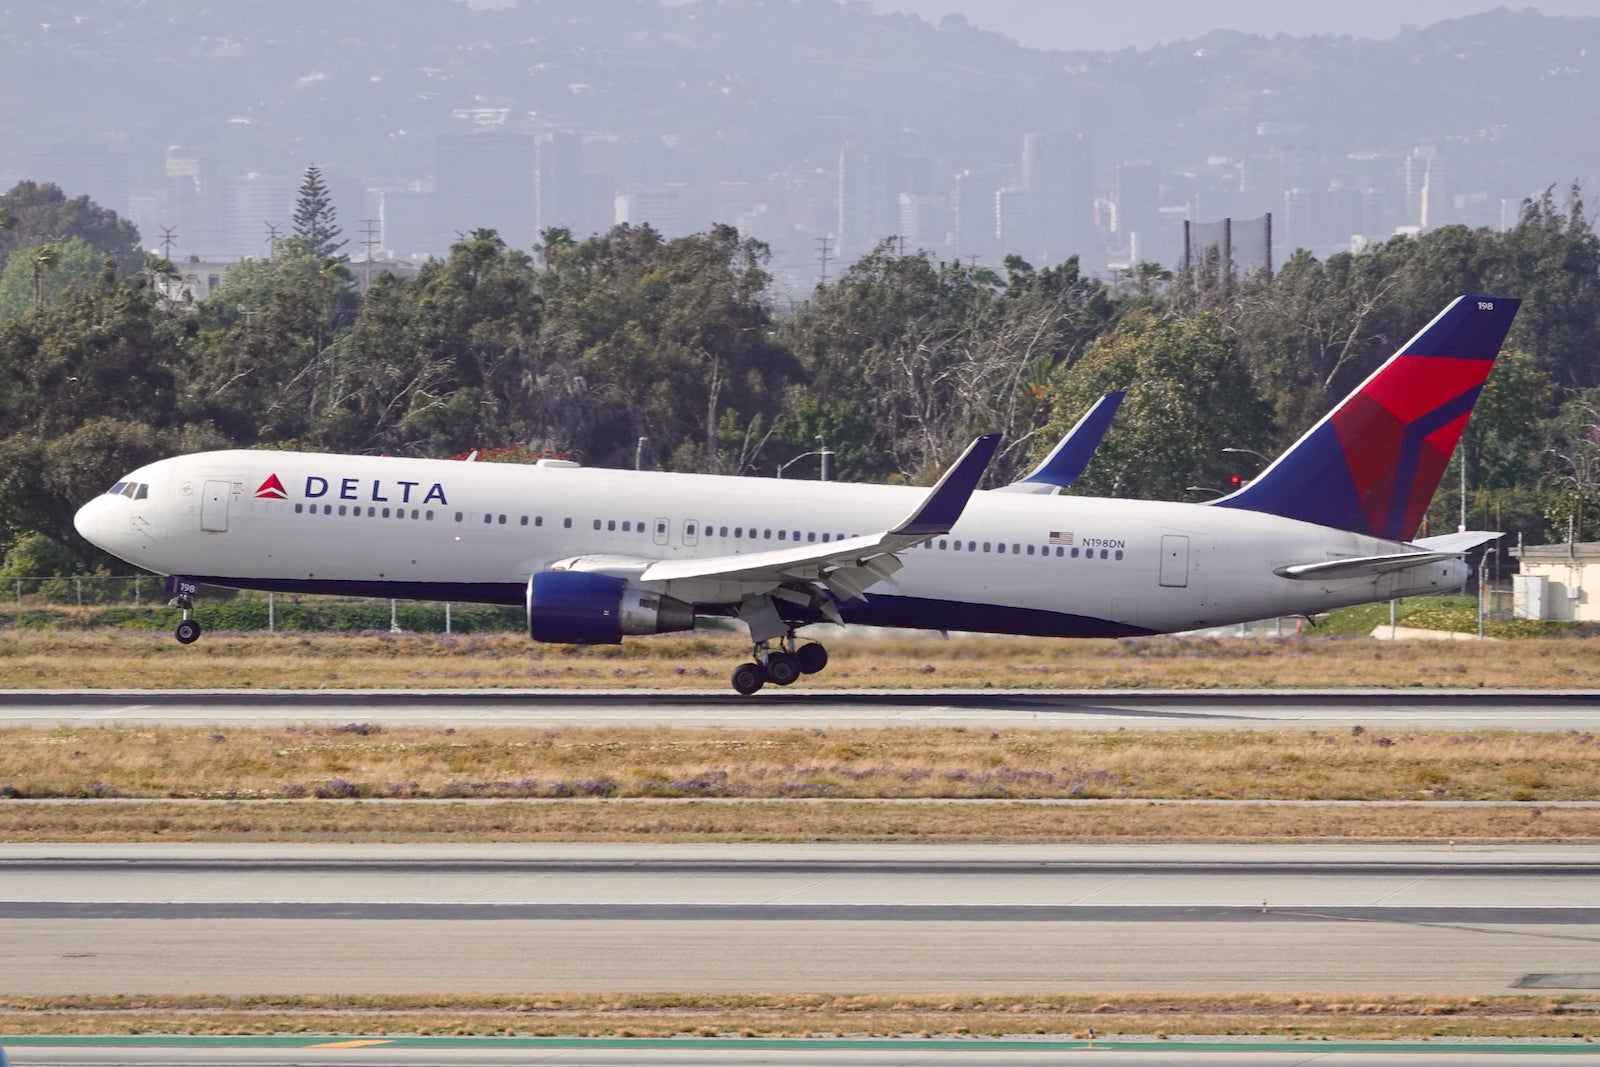 Delta partner award prices skyrocket: Here’s what you need to know